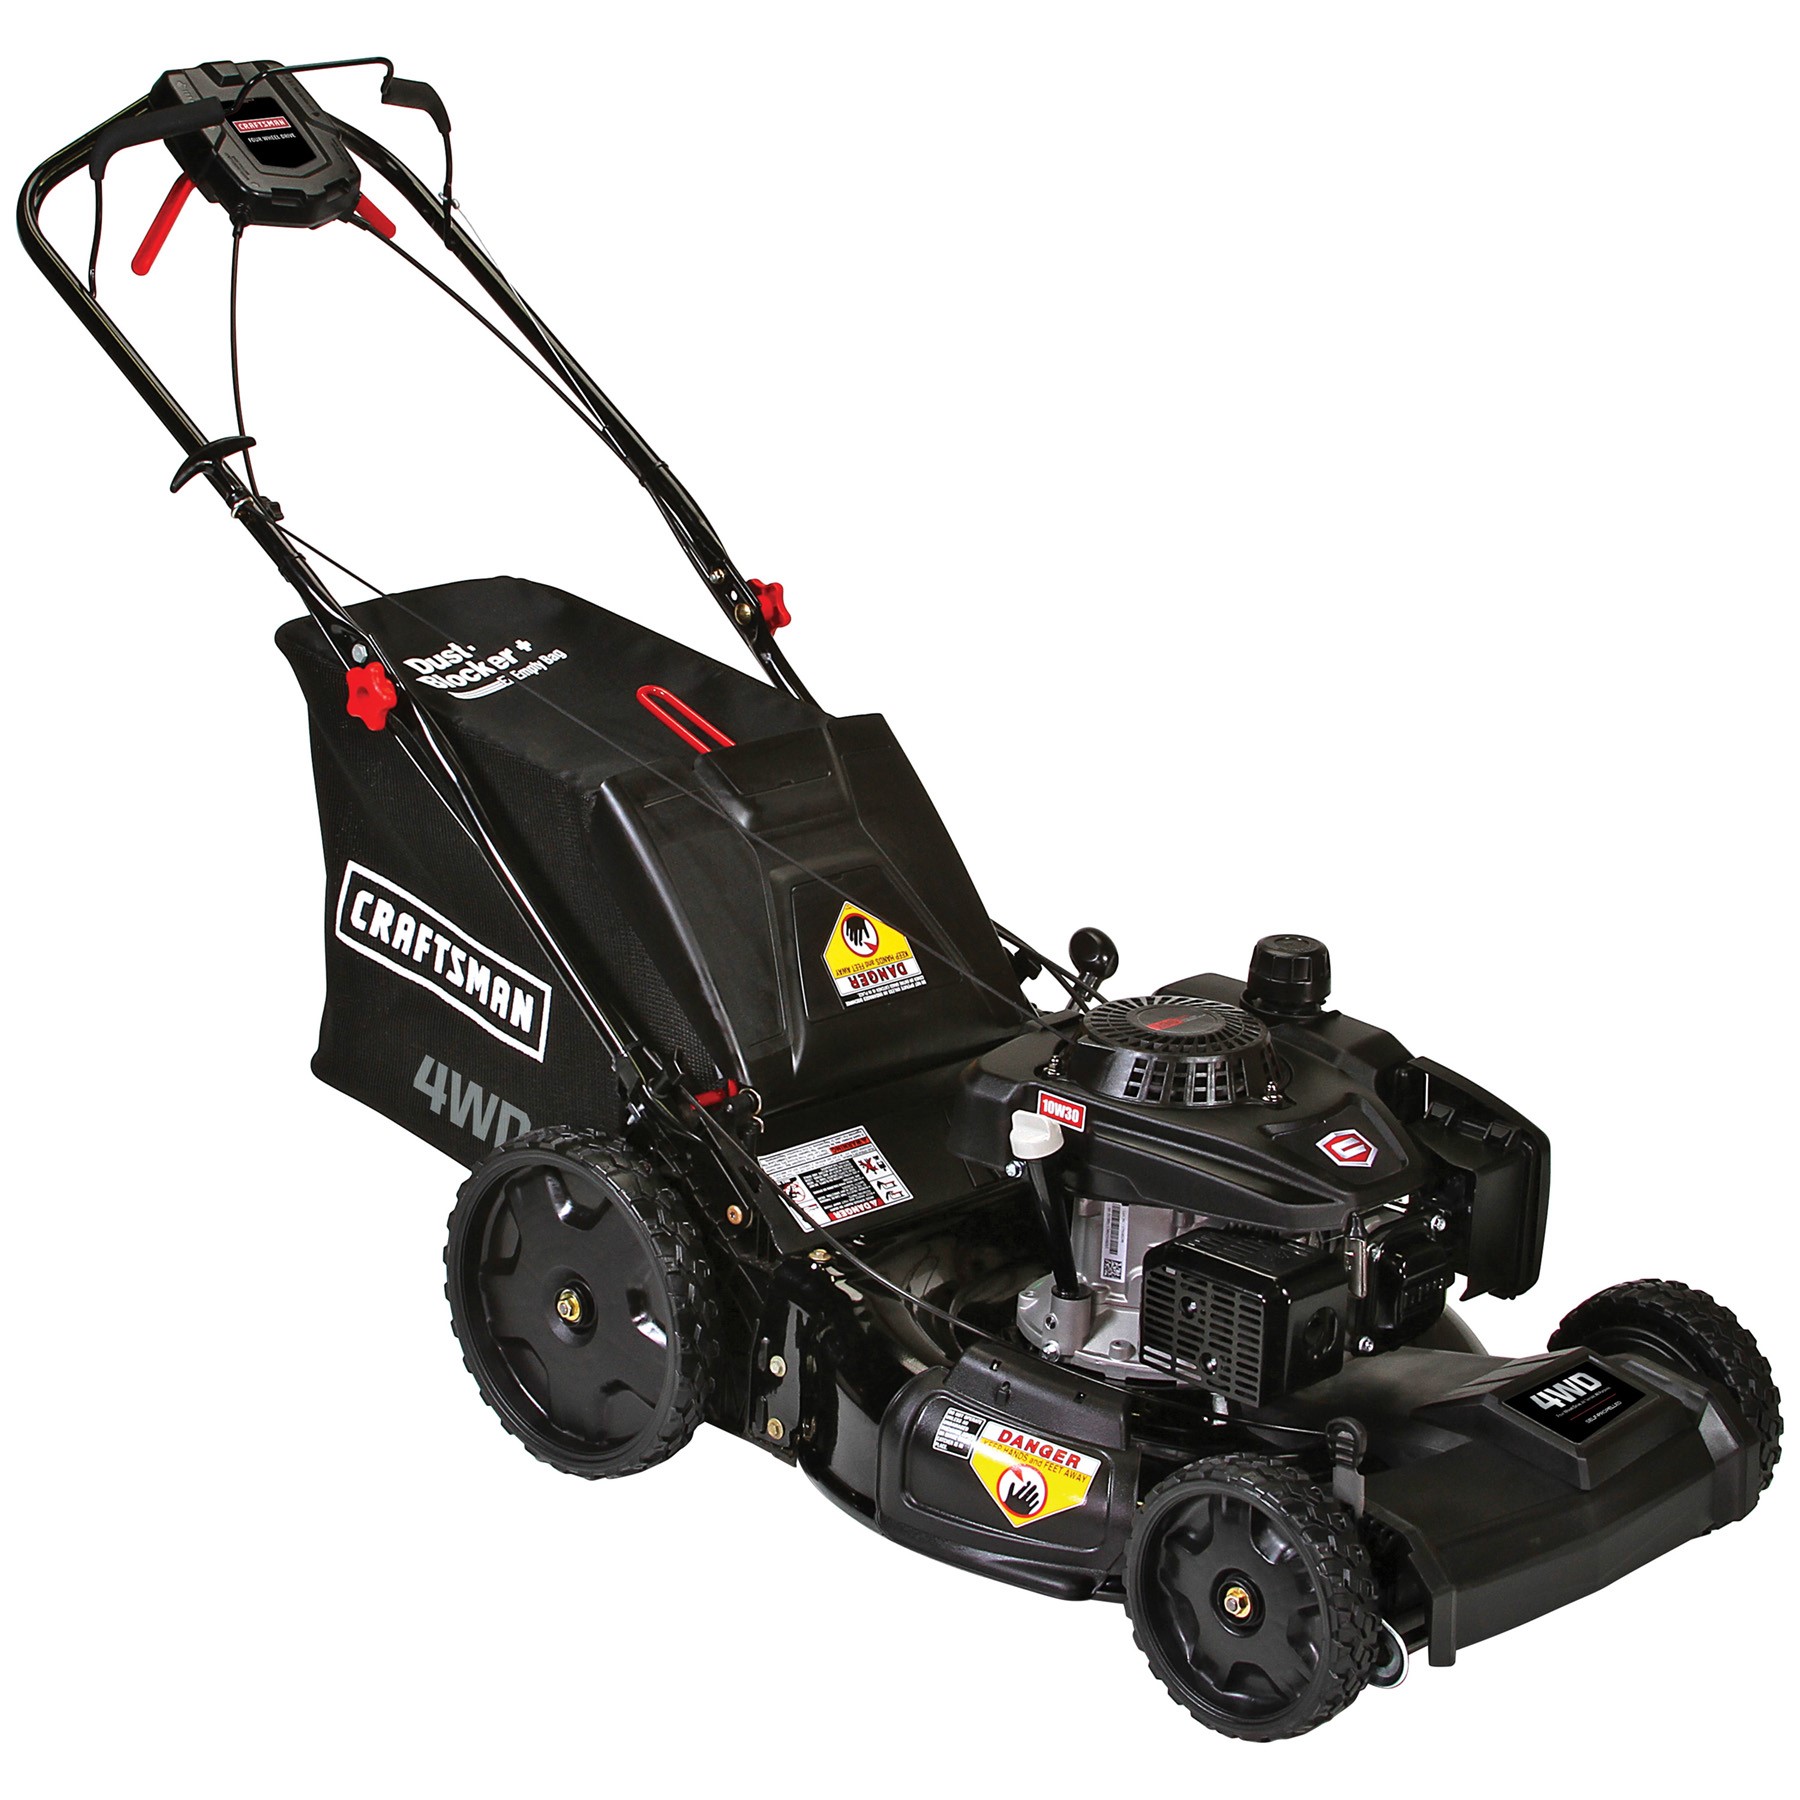 Craftsman 37955 21" 196cc 4Wheel Drive 3in1 Lawn Mower Shop Your Way Online Shopping